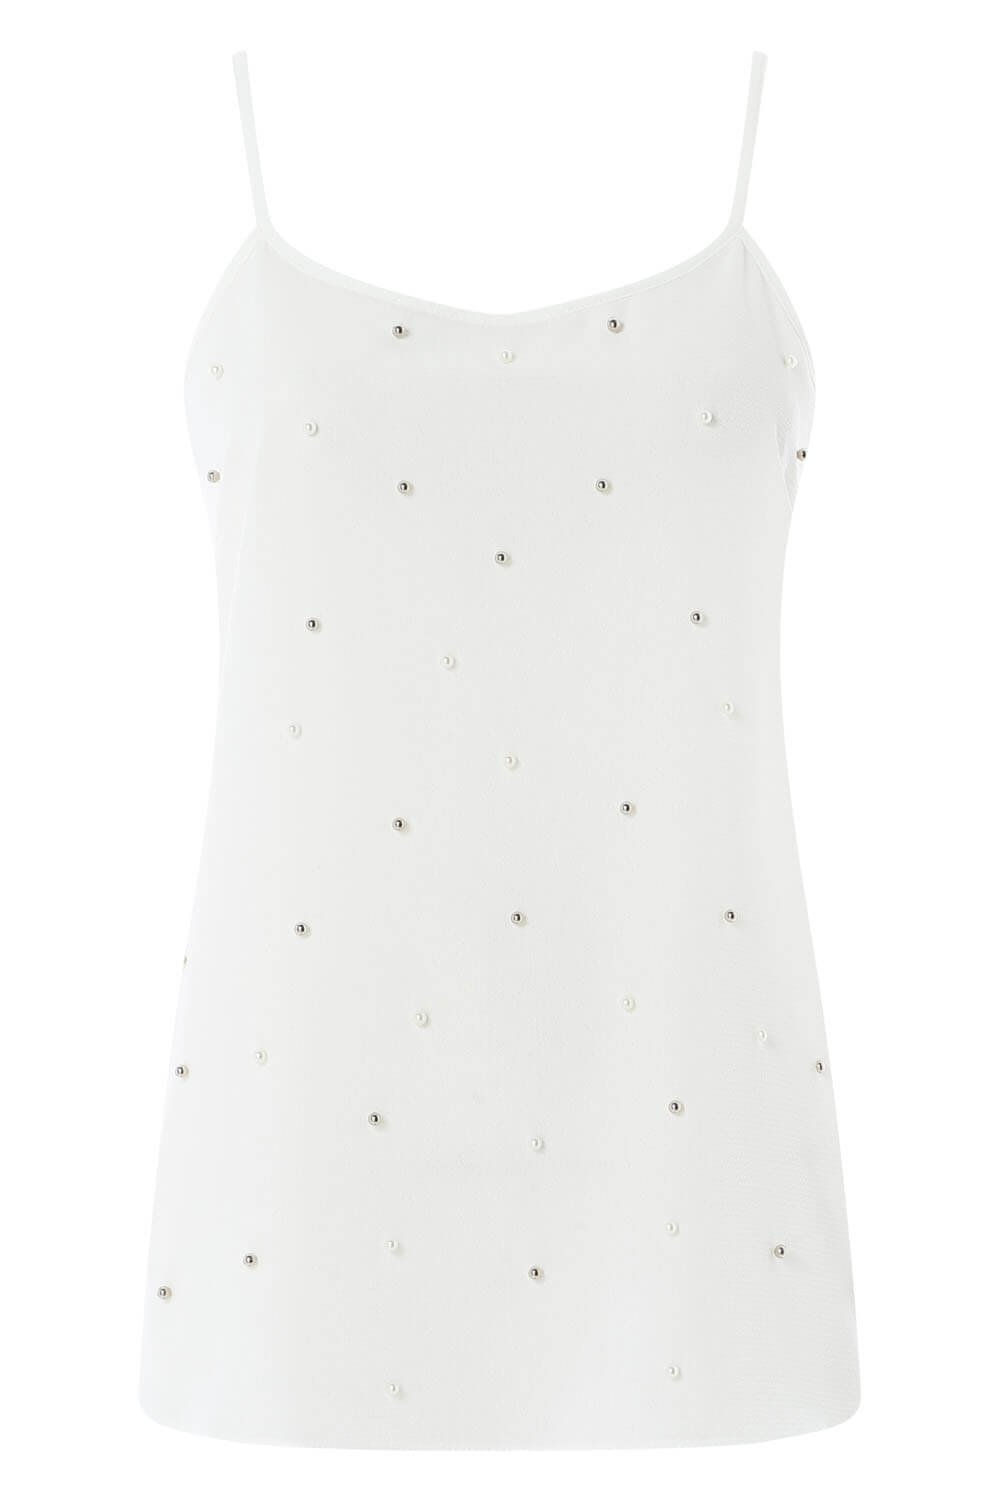 Pearl Embellished Camisole Top in Ivory - Roman Originals UK